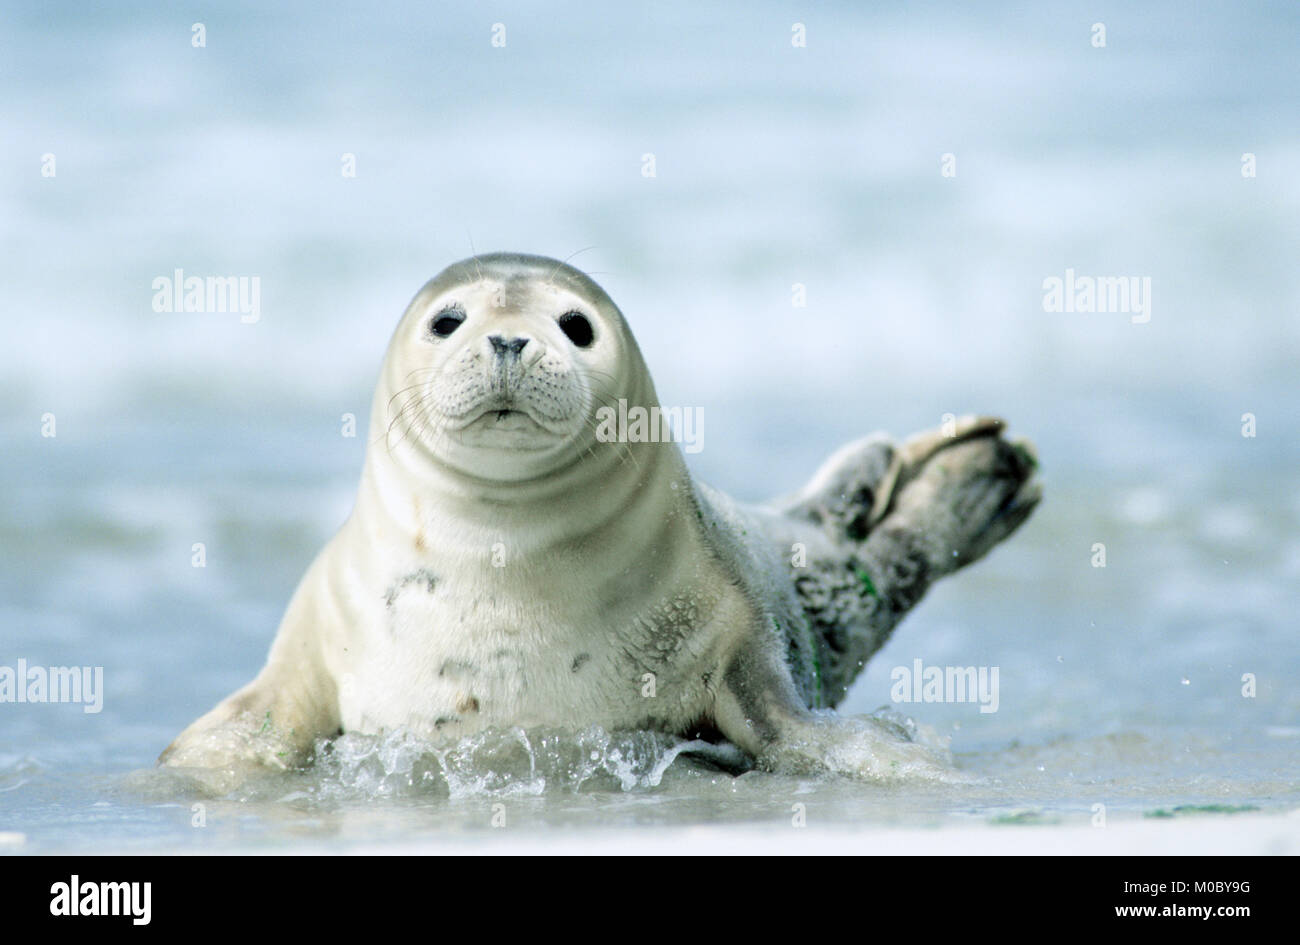 Young Harbour Seal, Helgoland, Schleswig-Holstein, Germany / (Phoca vitulina) | Seehund, Jungtier, Helgoland, Schleswig-Holstein, Deutschland Stock Photo